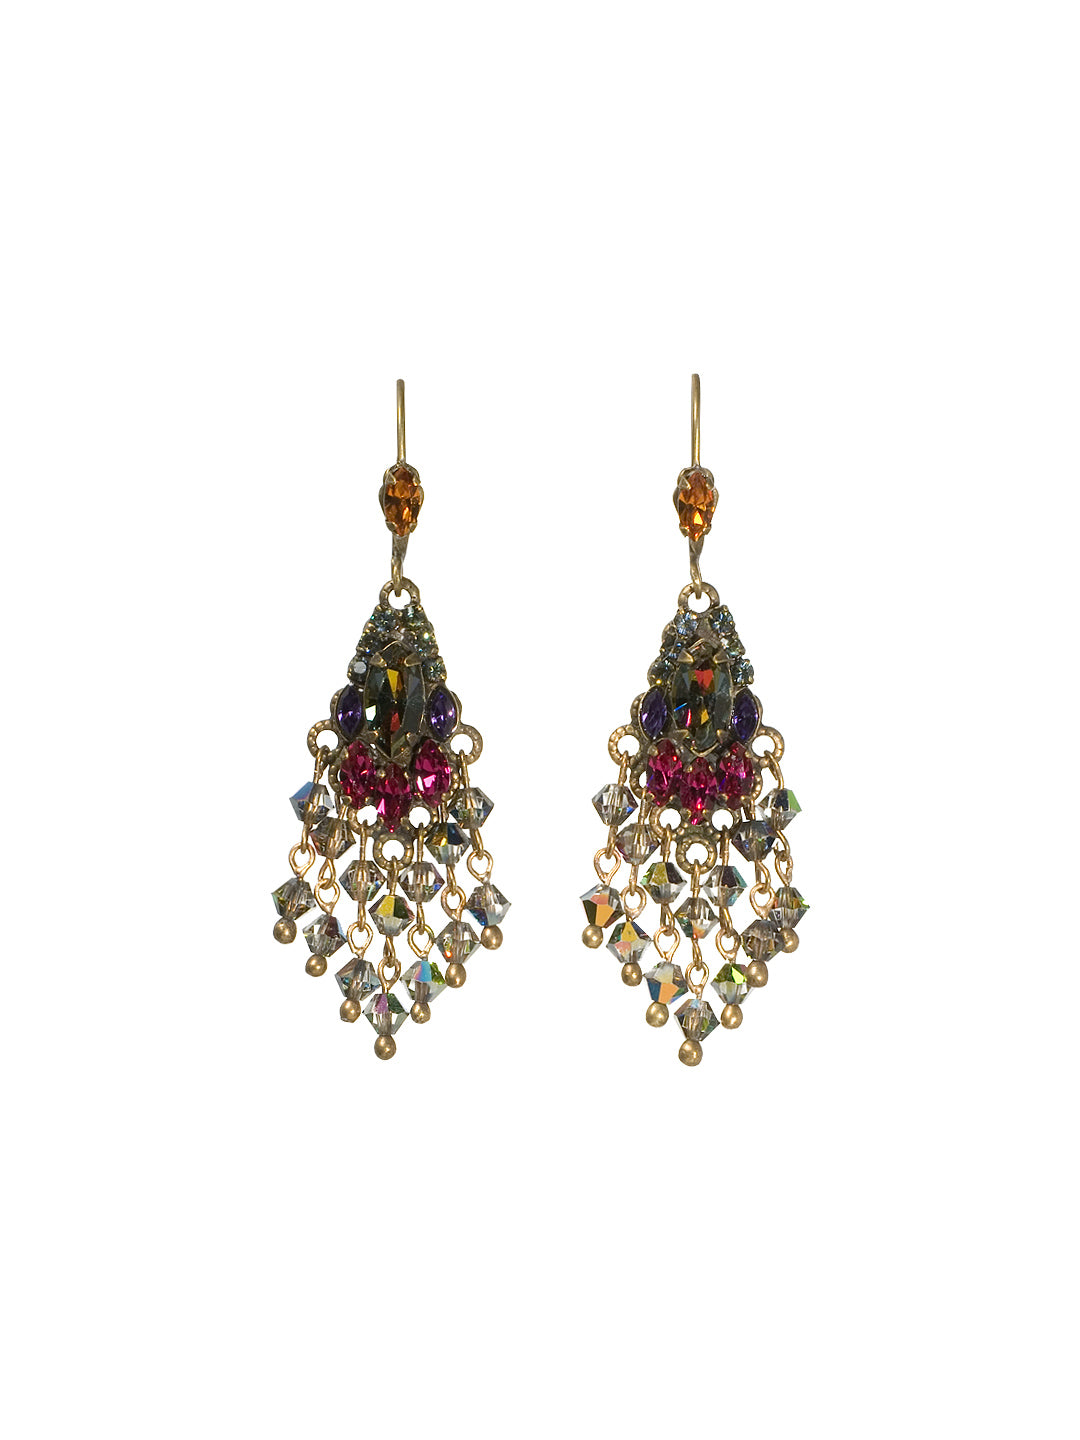 Chandelier Beaded Dangle Earrings - EBF8AGVO - <p>The Chandelier Beaded Dangle Earrings feature intricate beading and crystals on a lever-back French wire. From Sorrelli's Volcano collection in our Antique Gold-tone finish.</p>